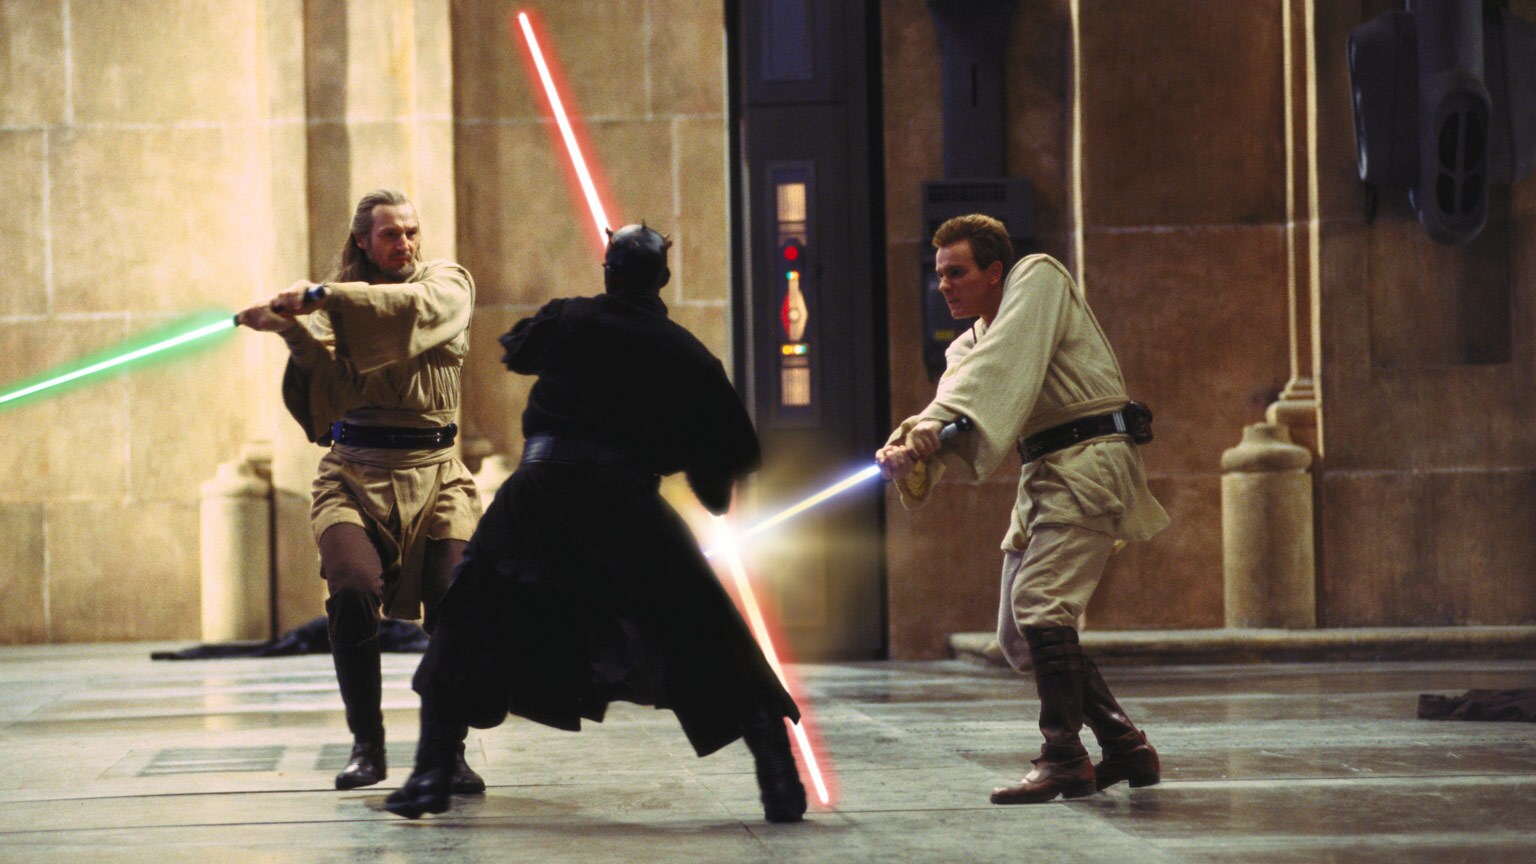 "All Films Are Personal": An Oral History of Star Wars: Episode I The Phantom Menace